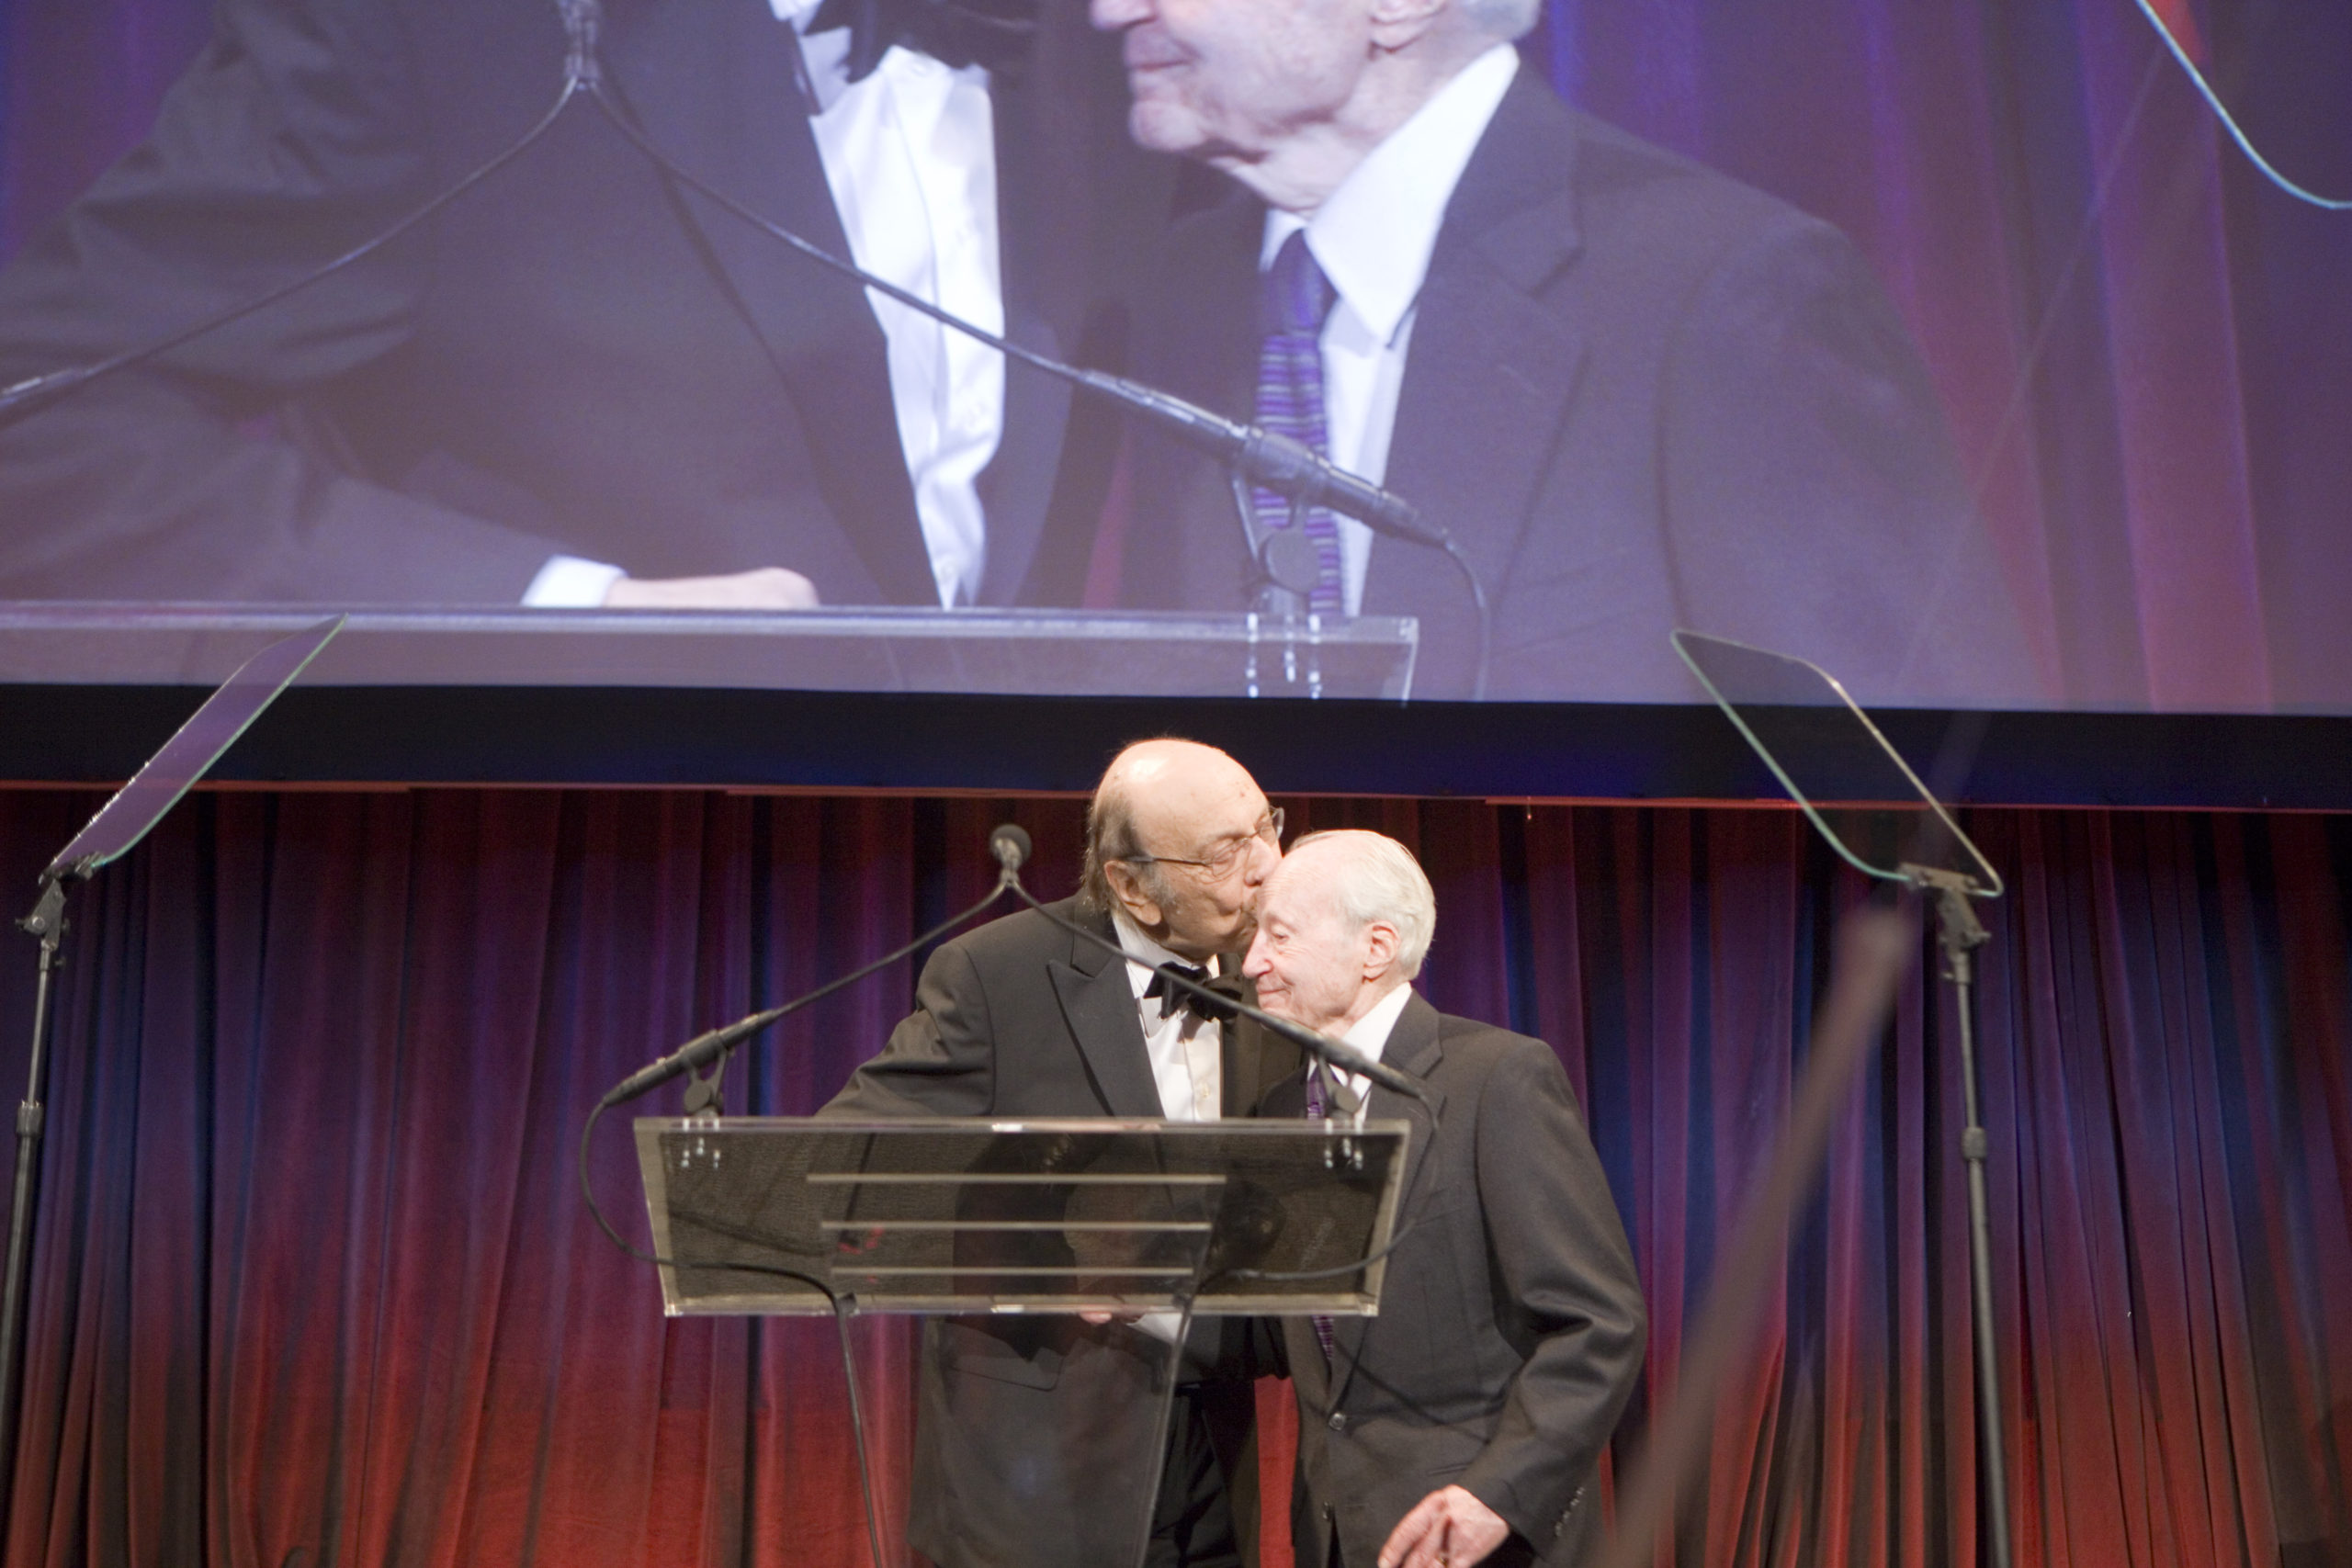 On stage at the National Design Awards gala, a man in a suit tenderly kisses Ralph Caplan on the head